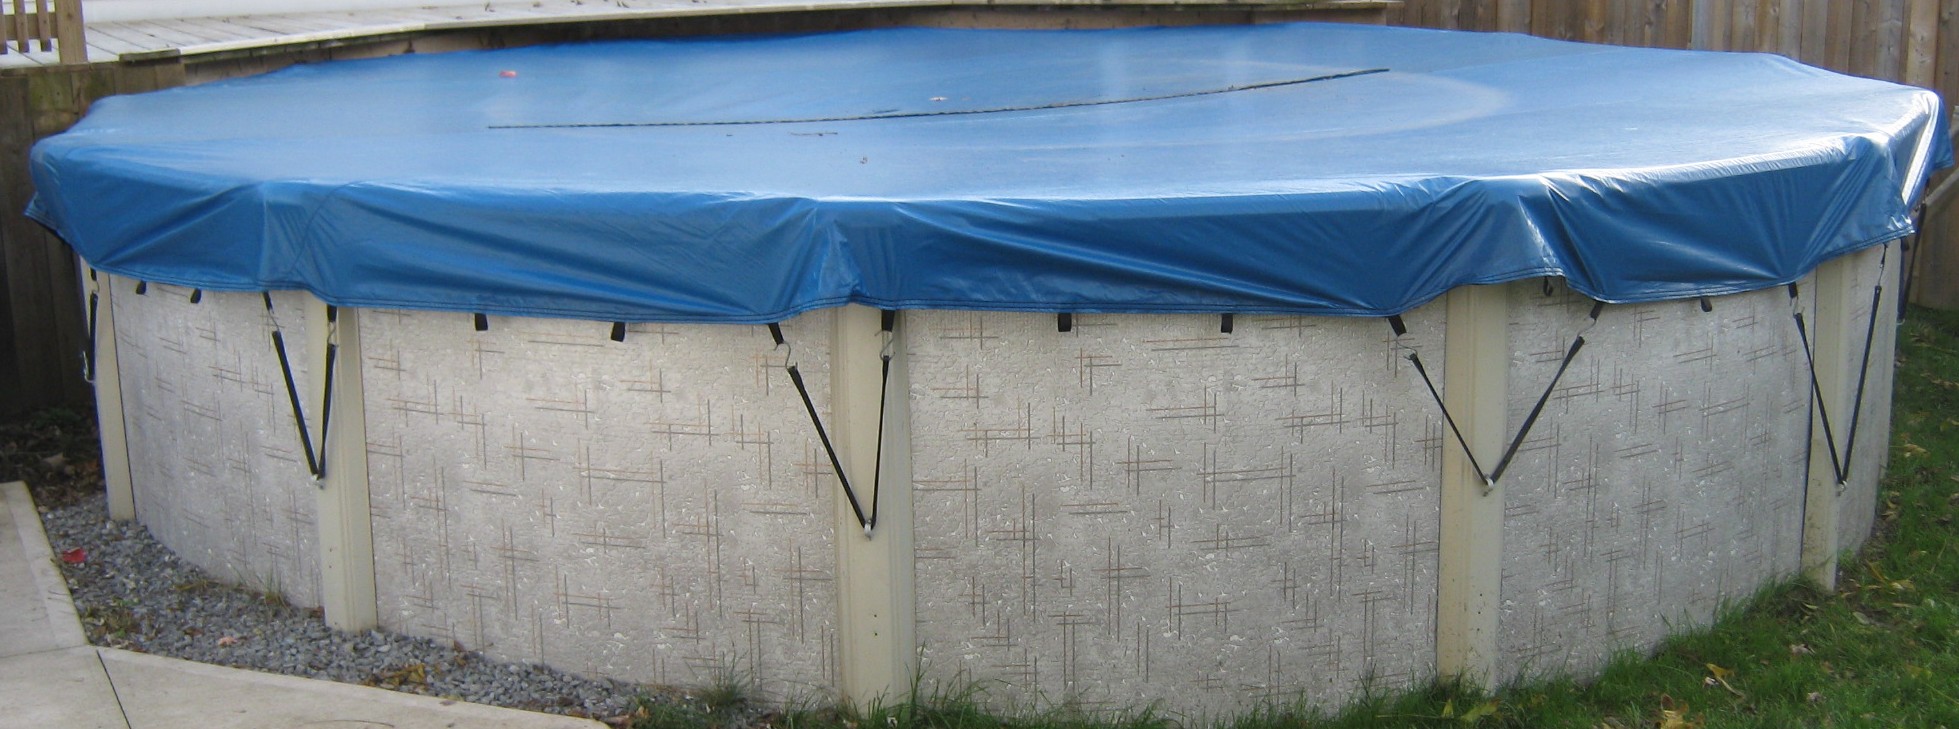 Arctic Blue Covers Above Ground, How To Put A Winter Cover On An Above Ground Pool With Partial Deck